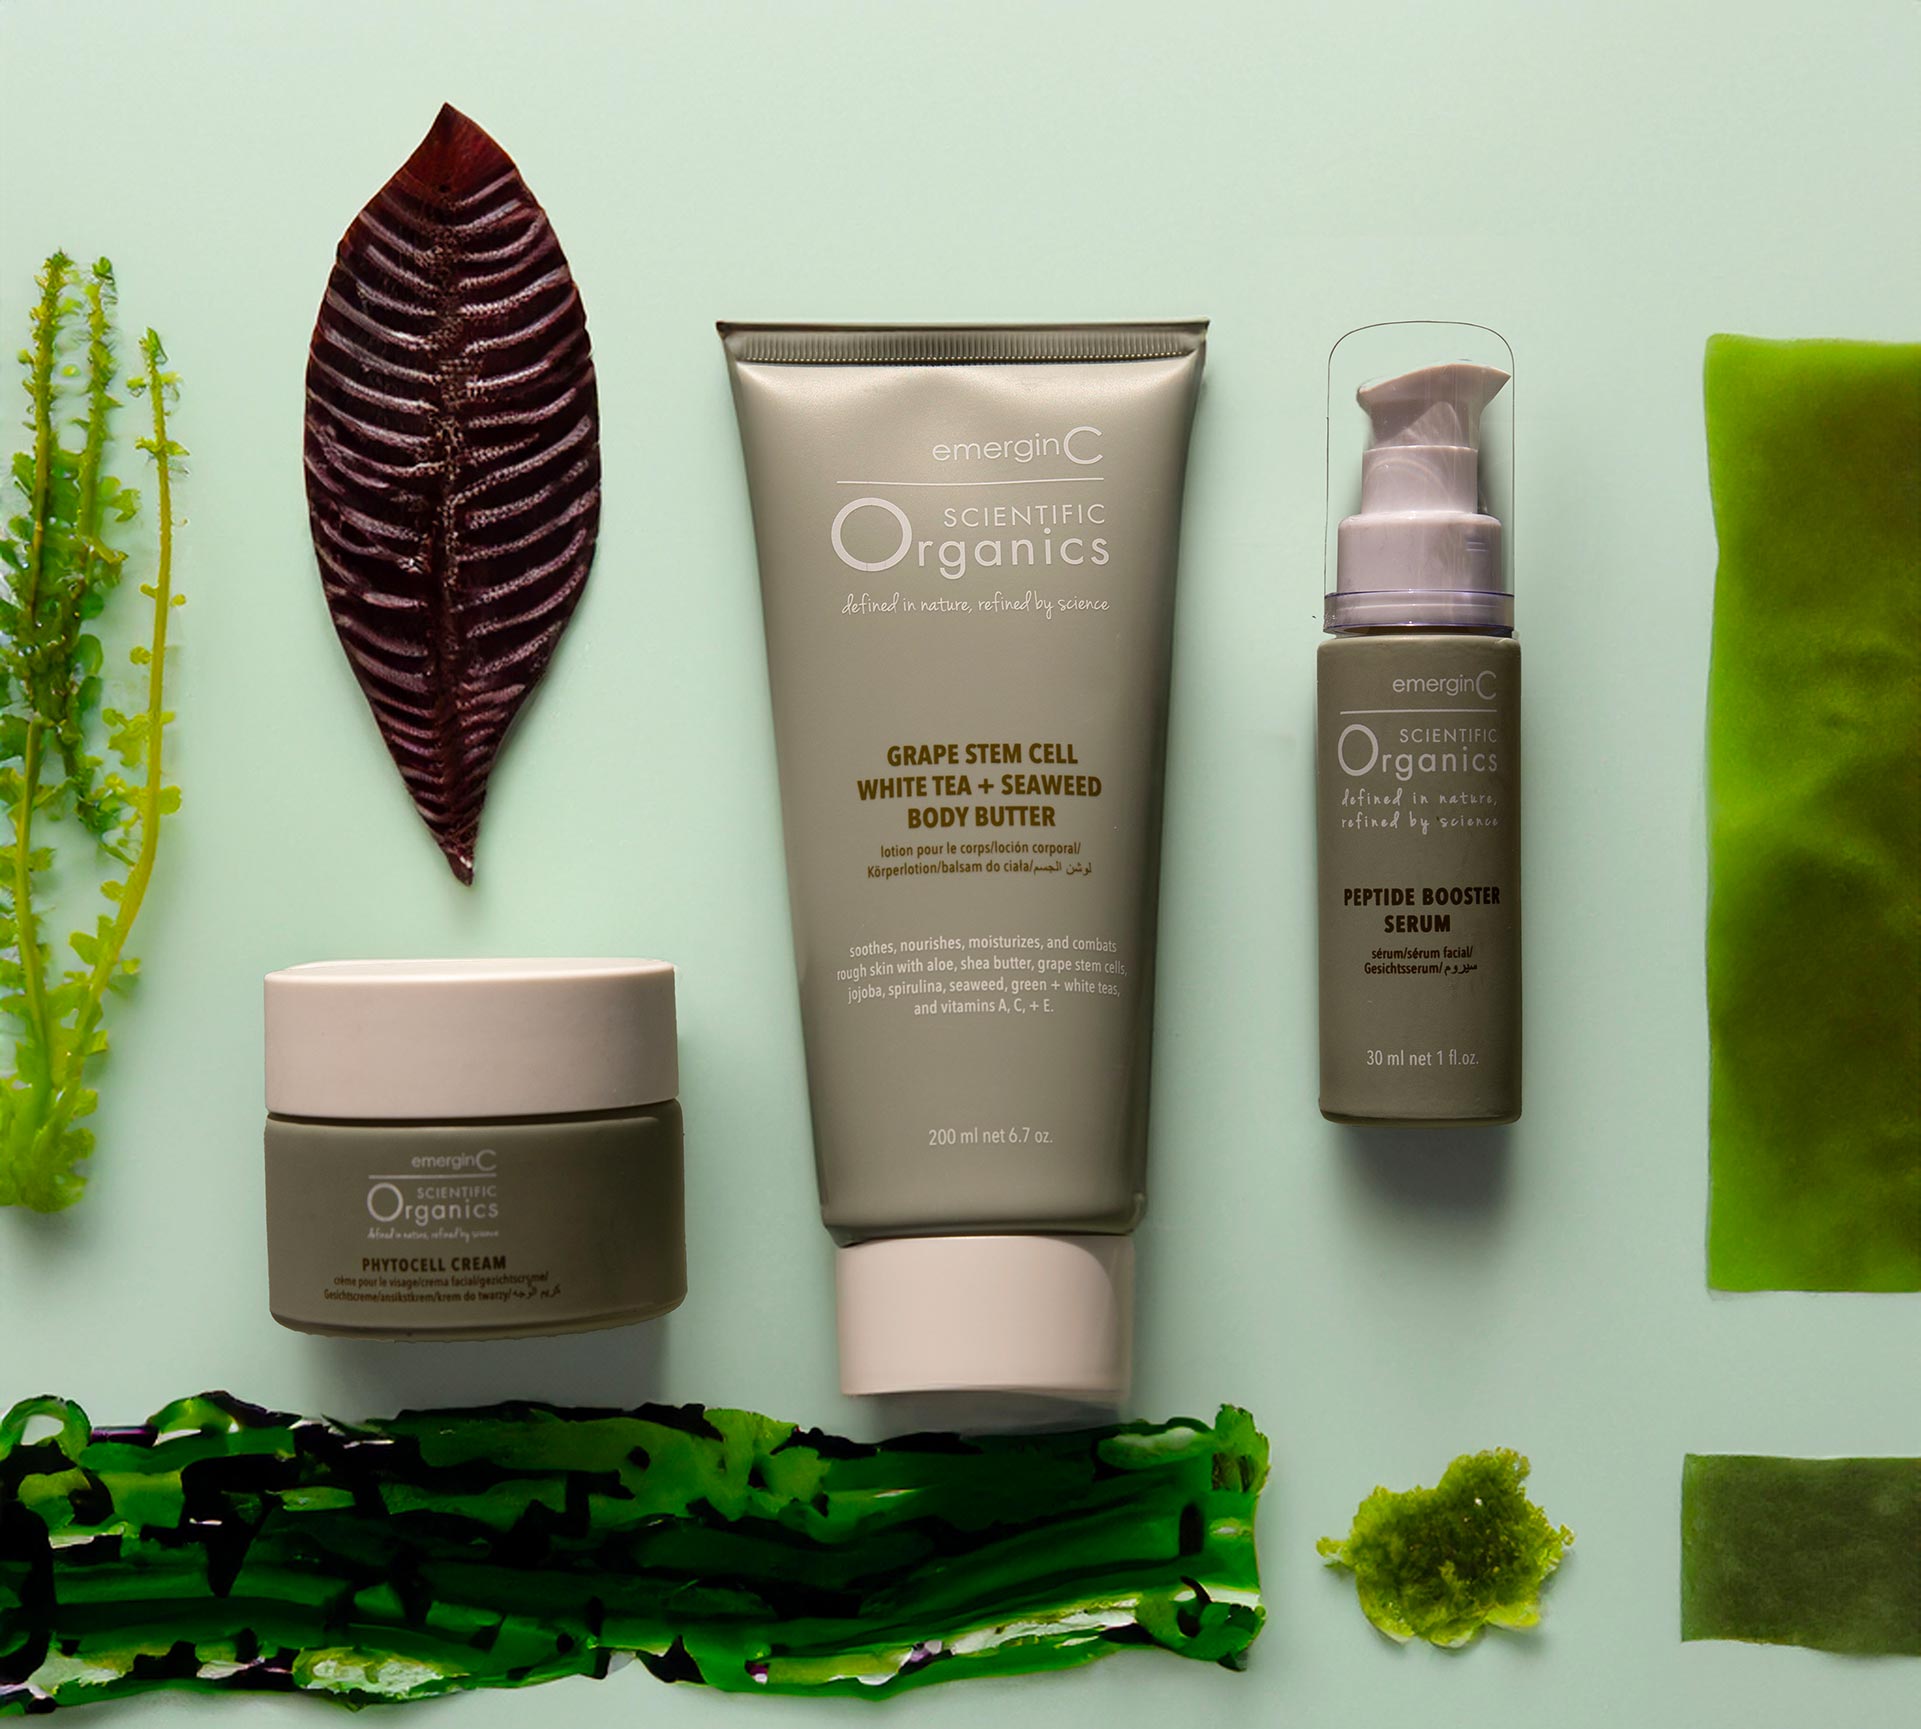 Scientific Organics products on a green background.